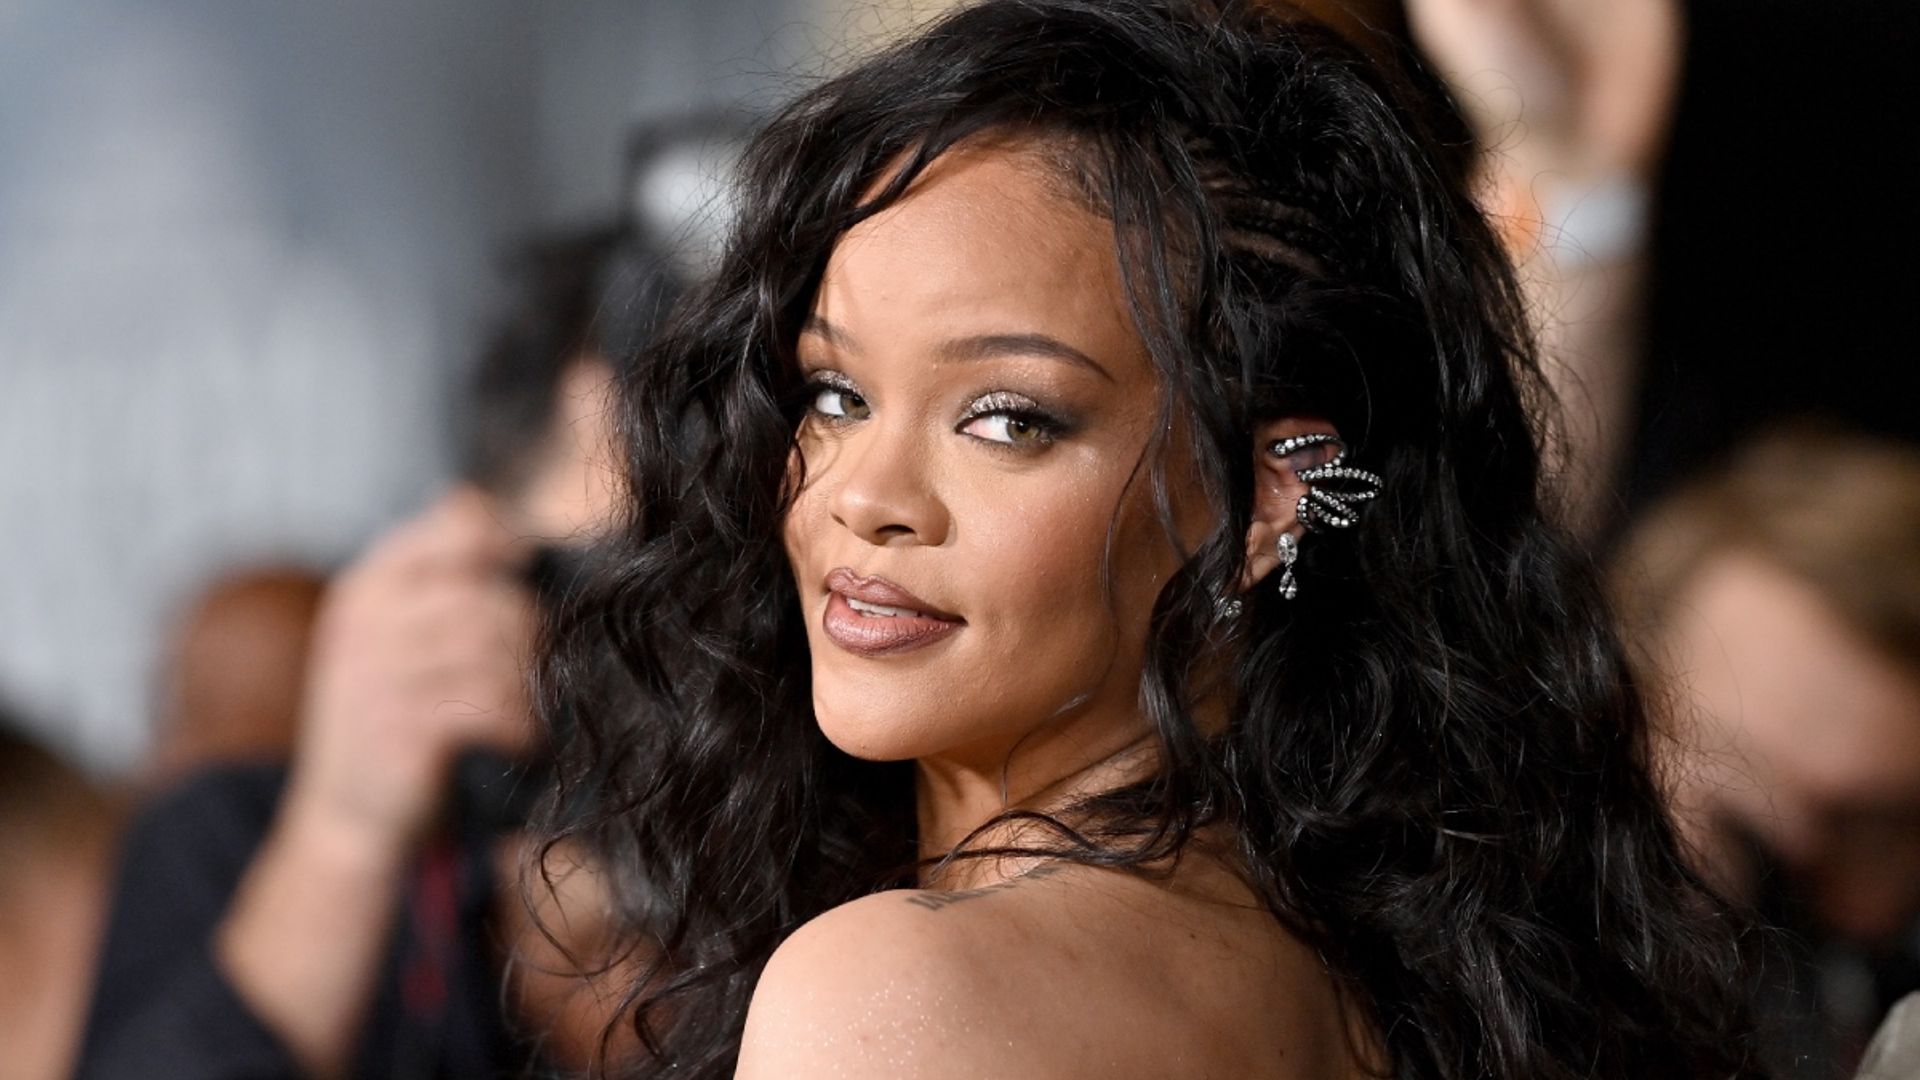 Rihanna nearly breaks the internet in strappy lingerie for a